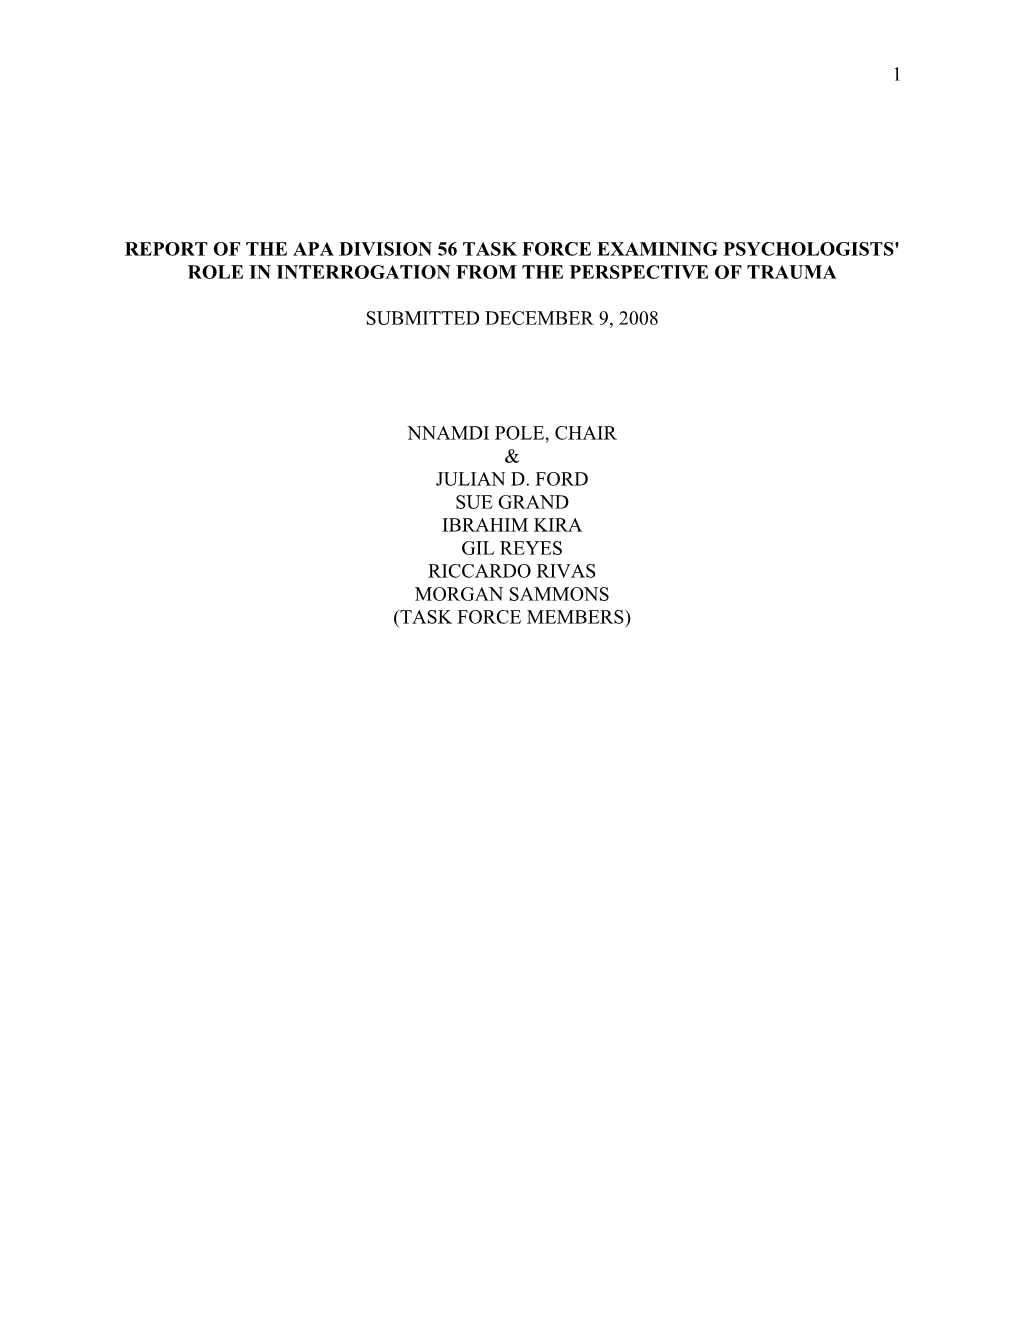 APA Division 56 Interrogation Task Force Report Original Submitted